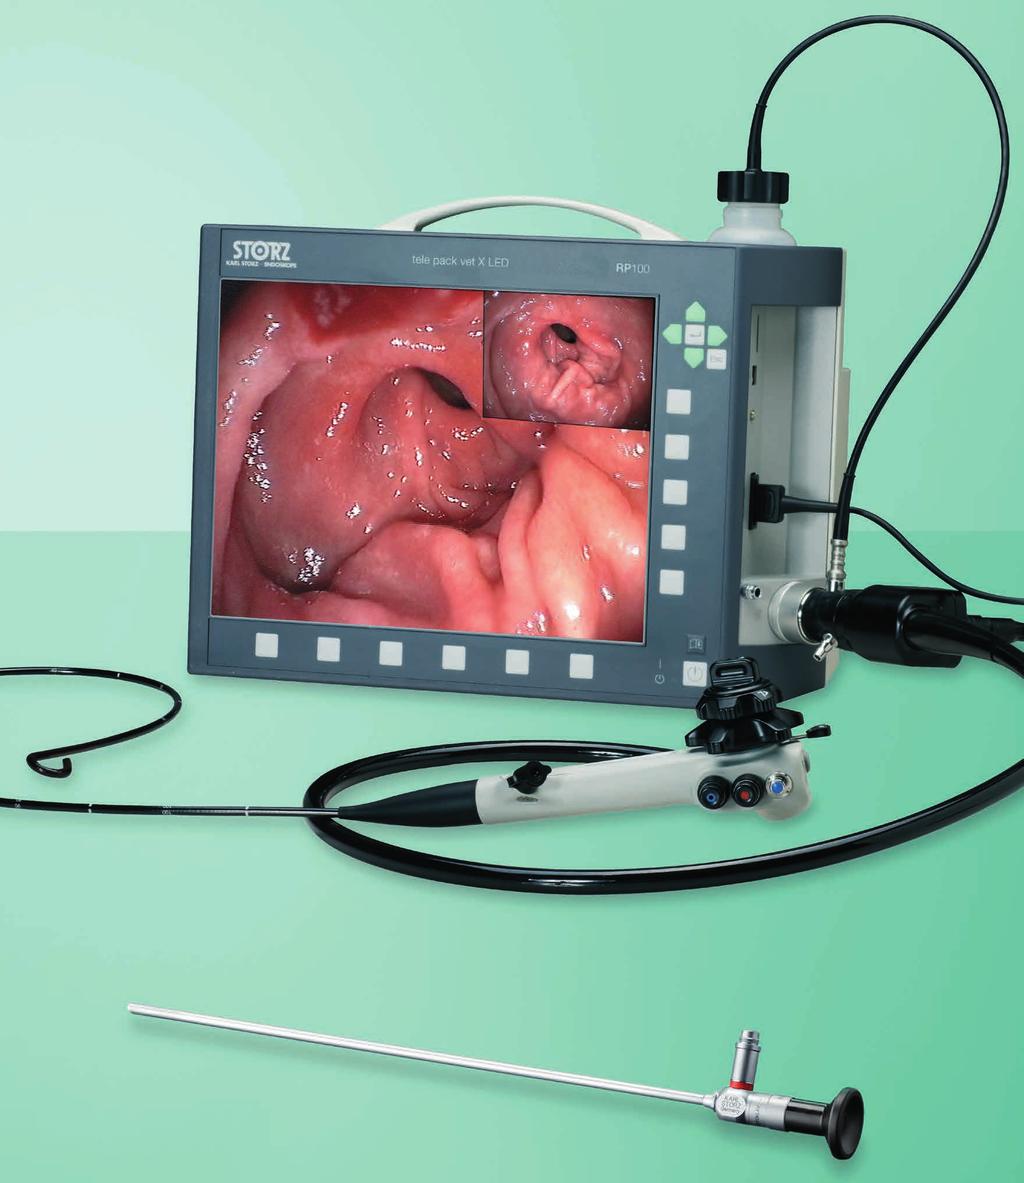 Compatible with TELE PACK VET X LED and Other KARL STORZ Imaging Systems Five devices, one compact unit This high-performance, all-in-one unit integrates every component necessary for endoscopic